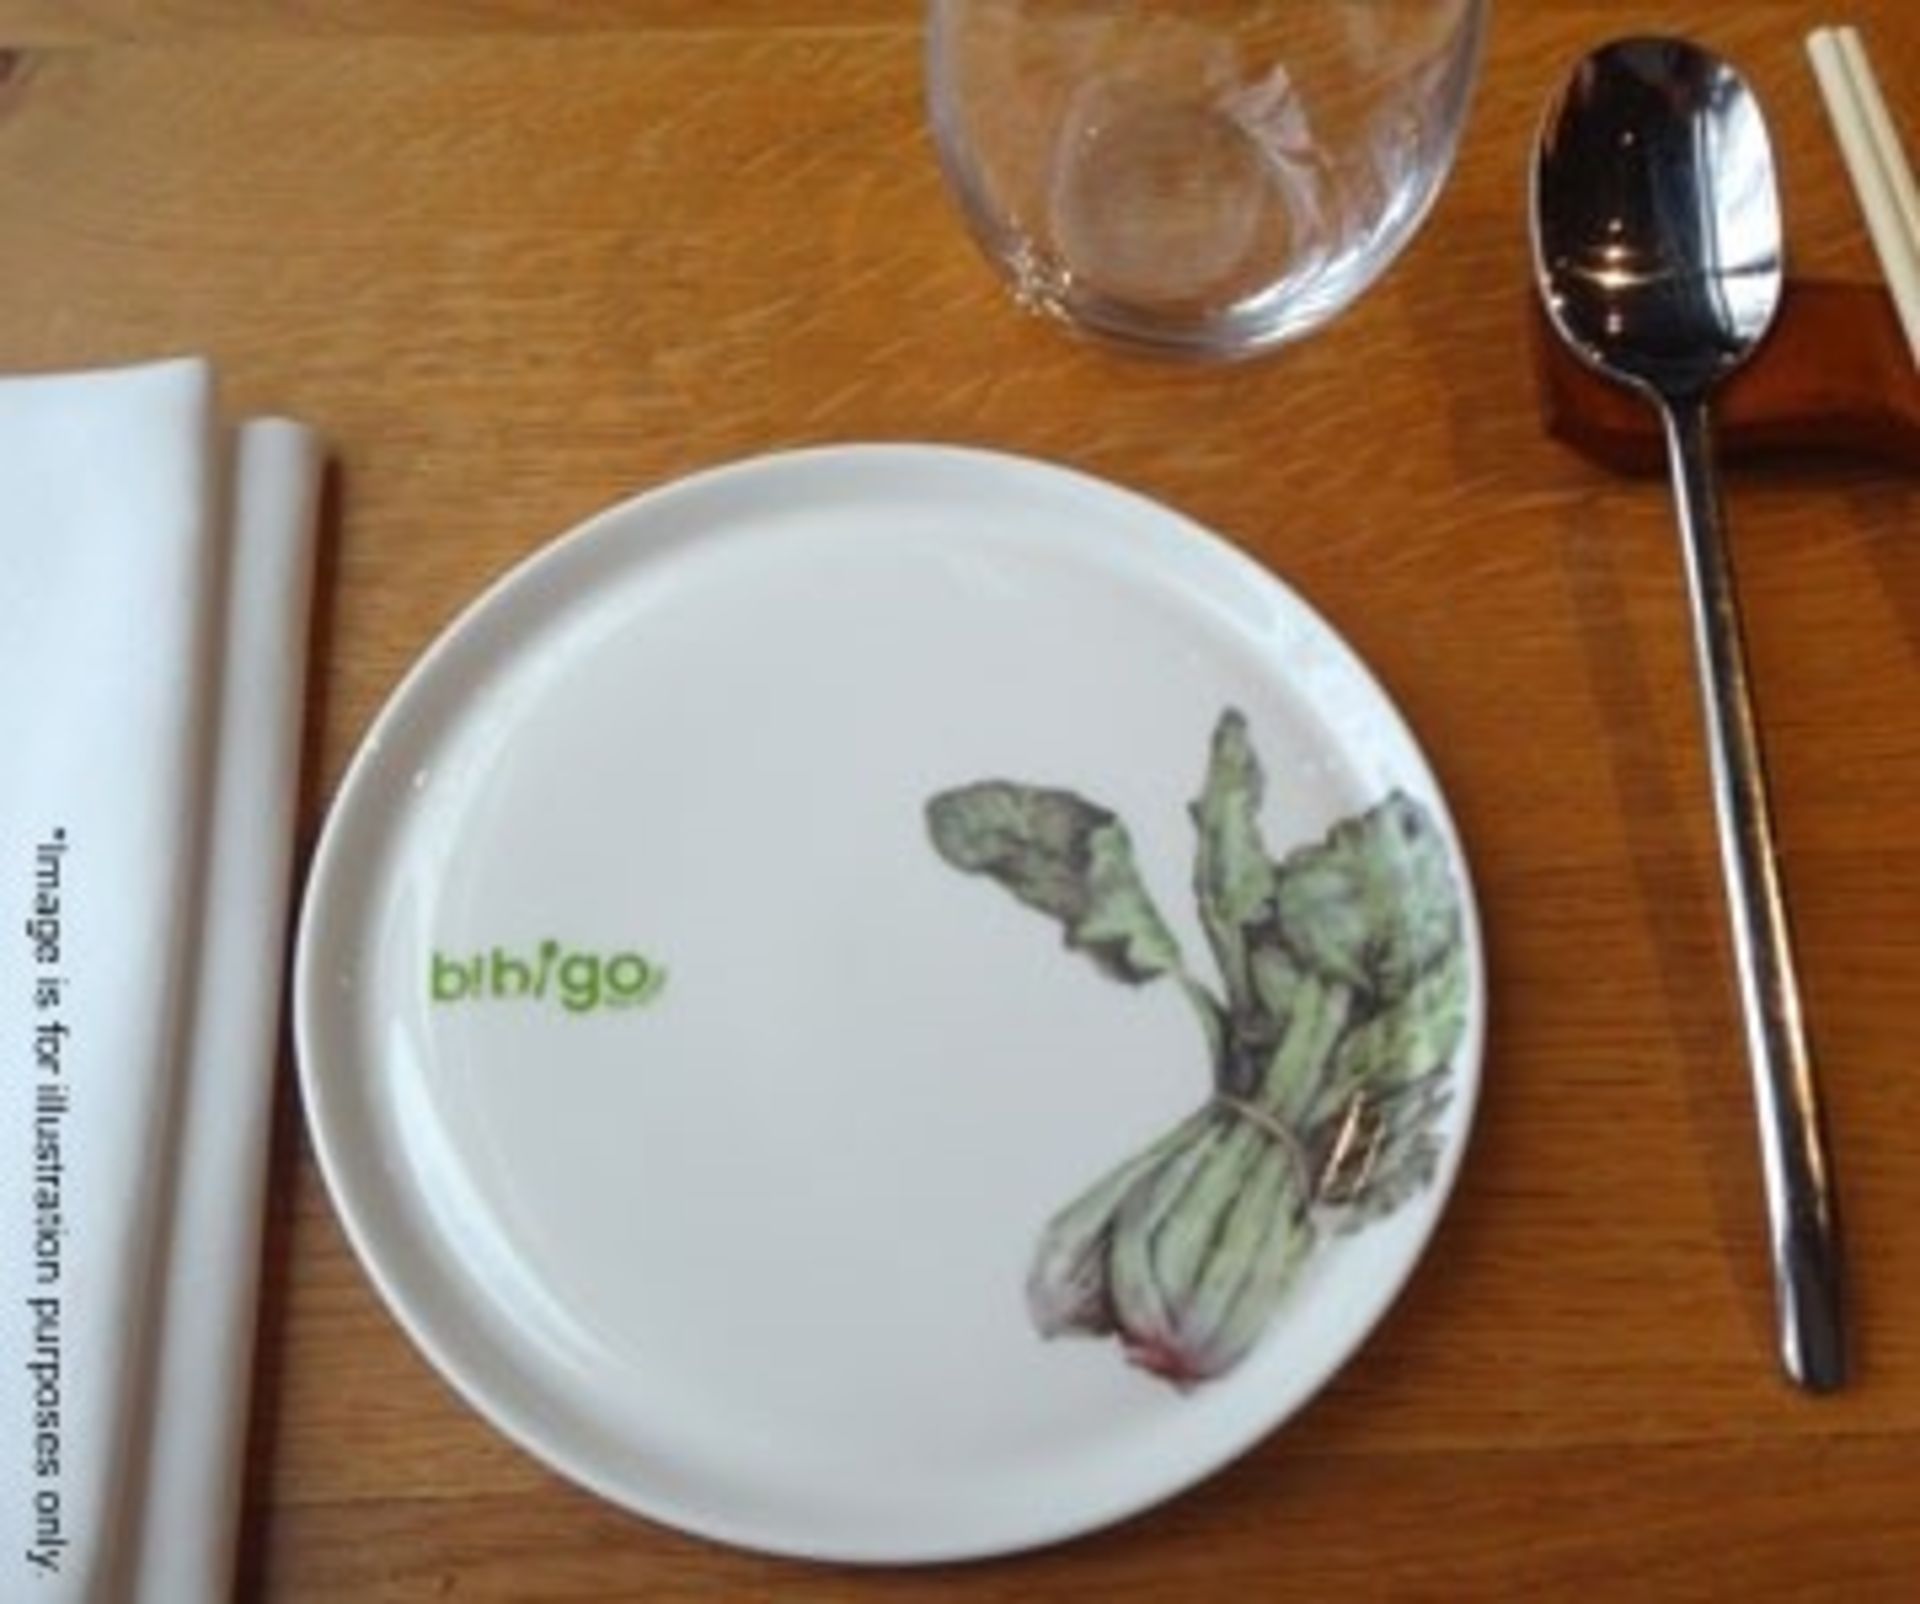 50 x BIBIGO Branded Fine Dining Plates - 16.5cm - Pre-owned, From A London Restaurant - Ref: WH1